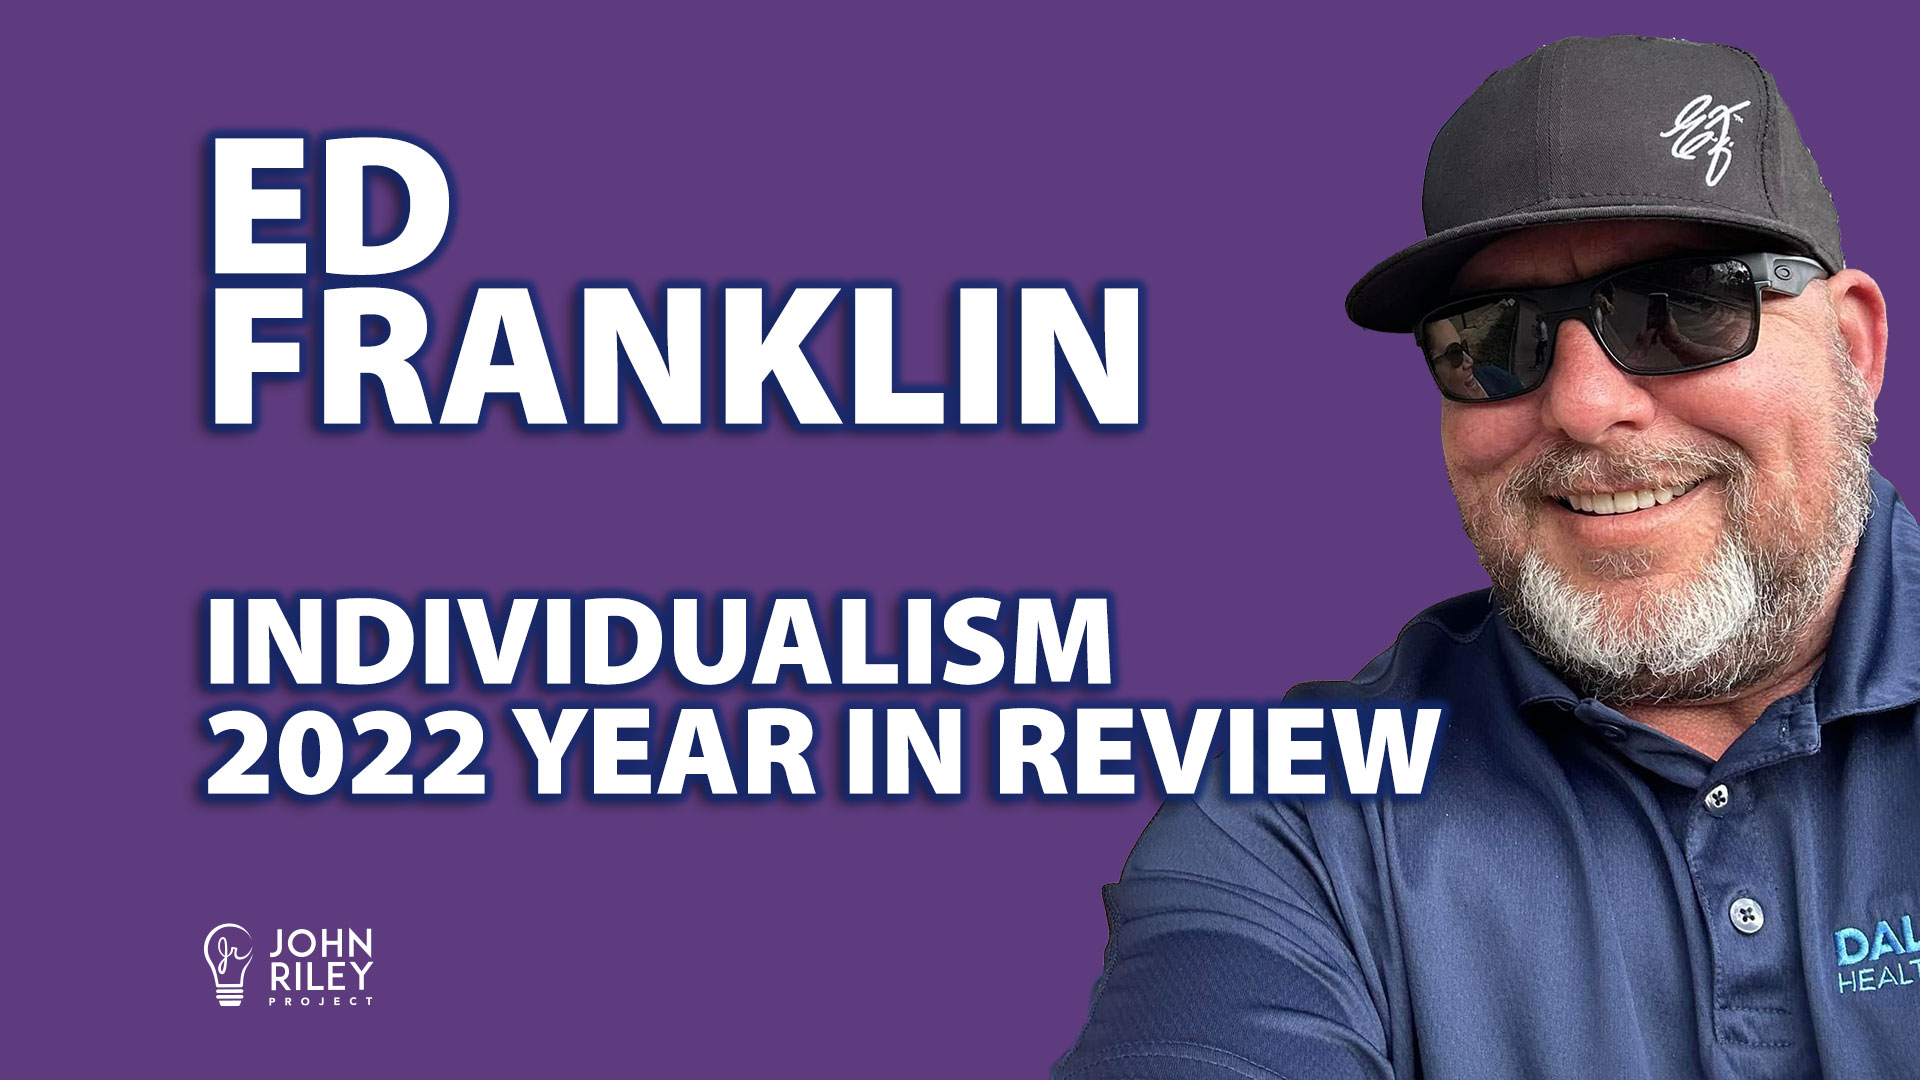 Ed Franklin, No Limits, Individualism, 2022 Year in Review